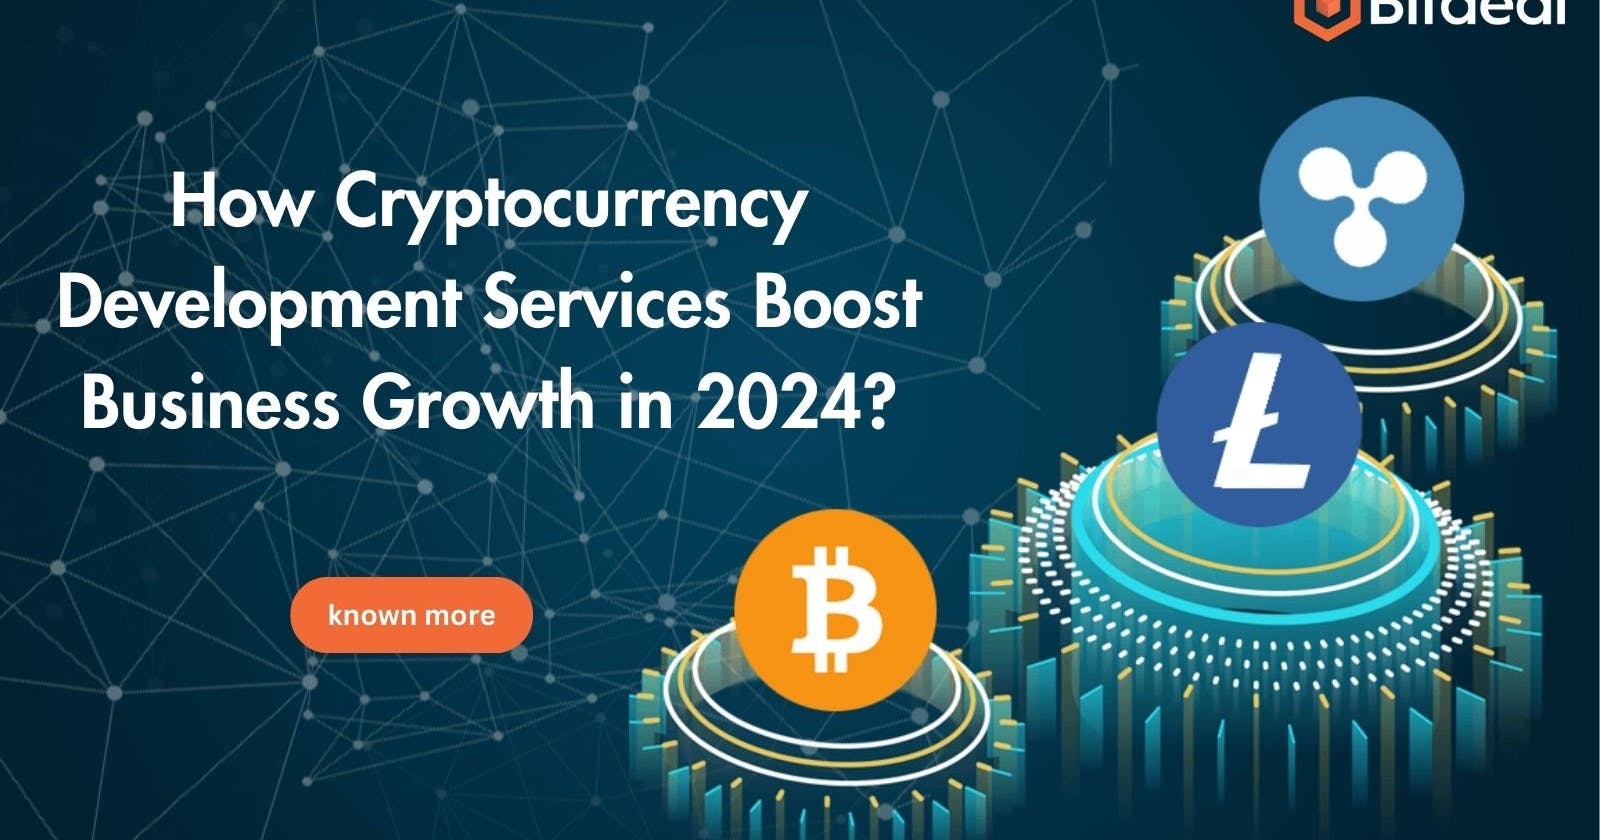 How can Entrepreneurs benefit from cryptocurrency development services?